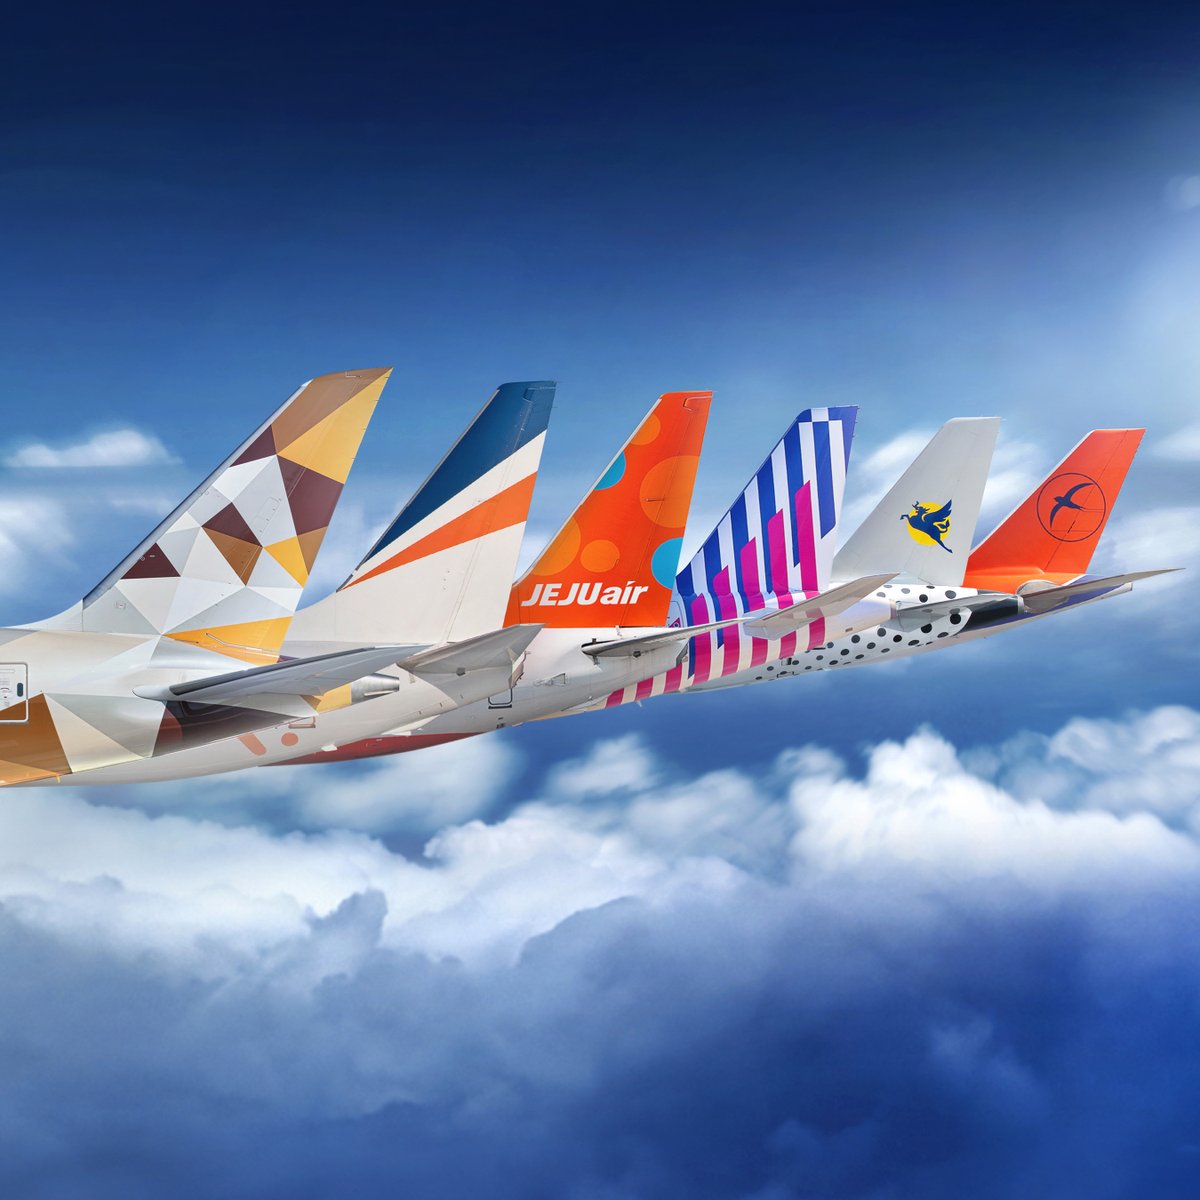 We've launched reciprocal interline partnerships with five new airline partners, further providing travel options for guests across our expanding global network allowing enhanced connectivity to destinations. Read more: etihad.com/en-ae/news/eti…